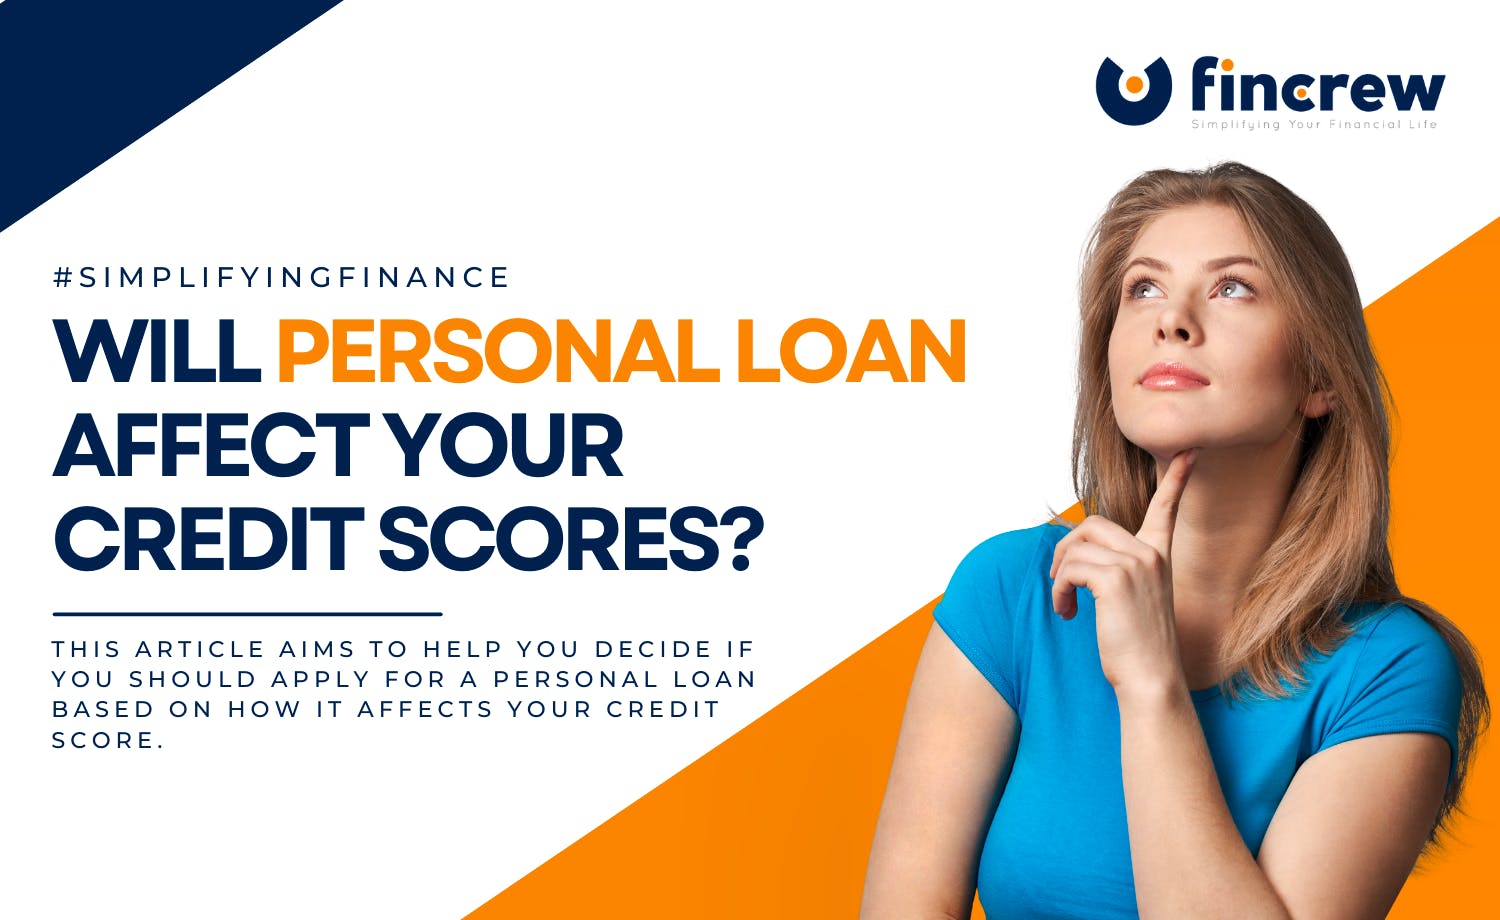 How Personal Loan Affect Your Credit Score